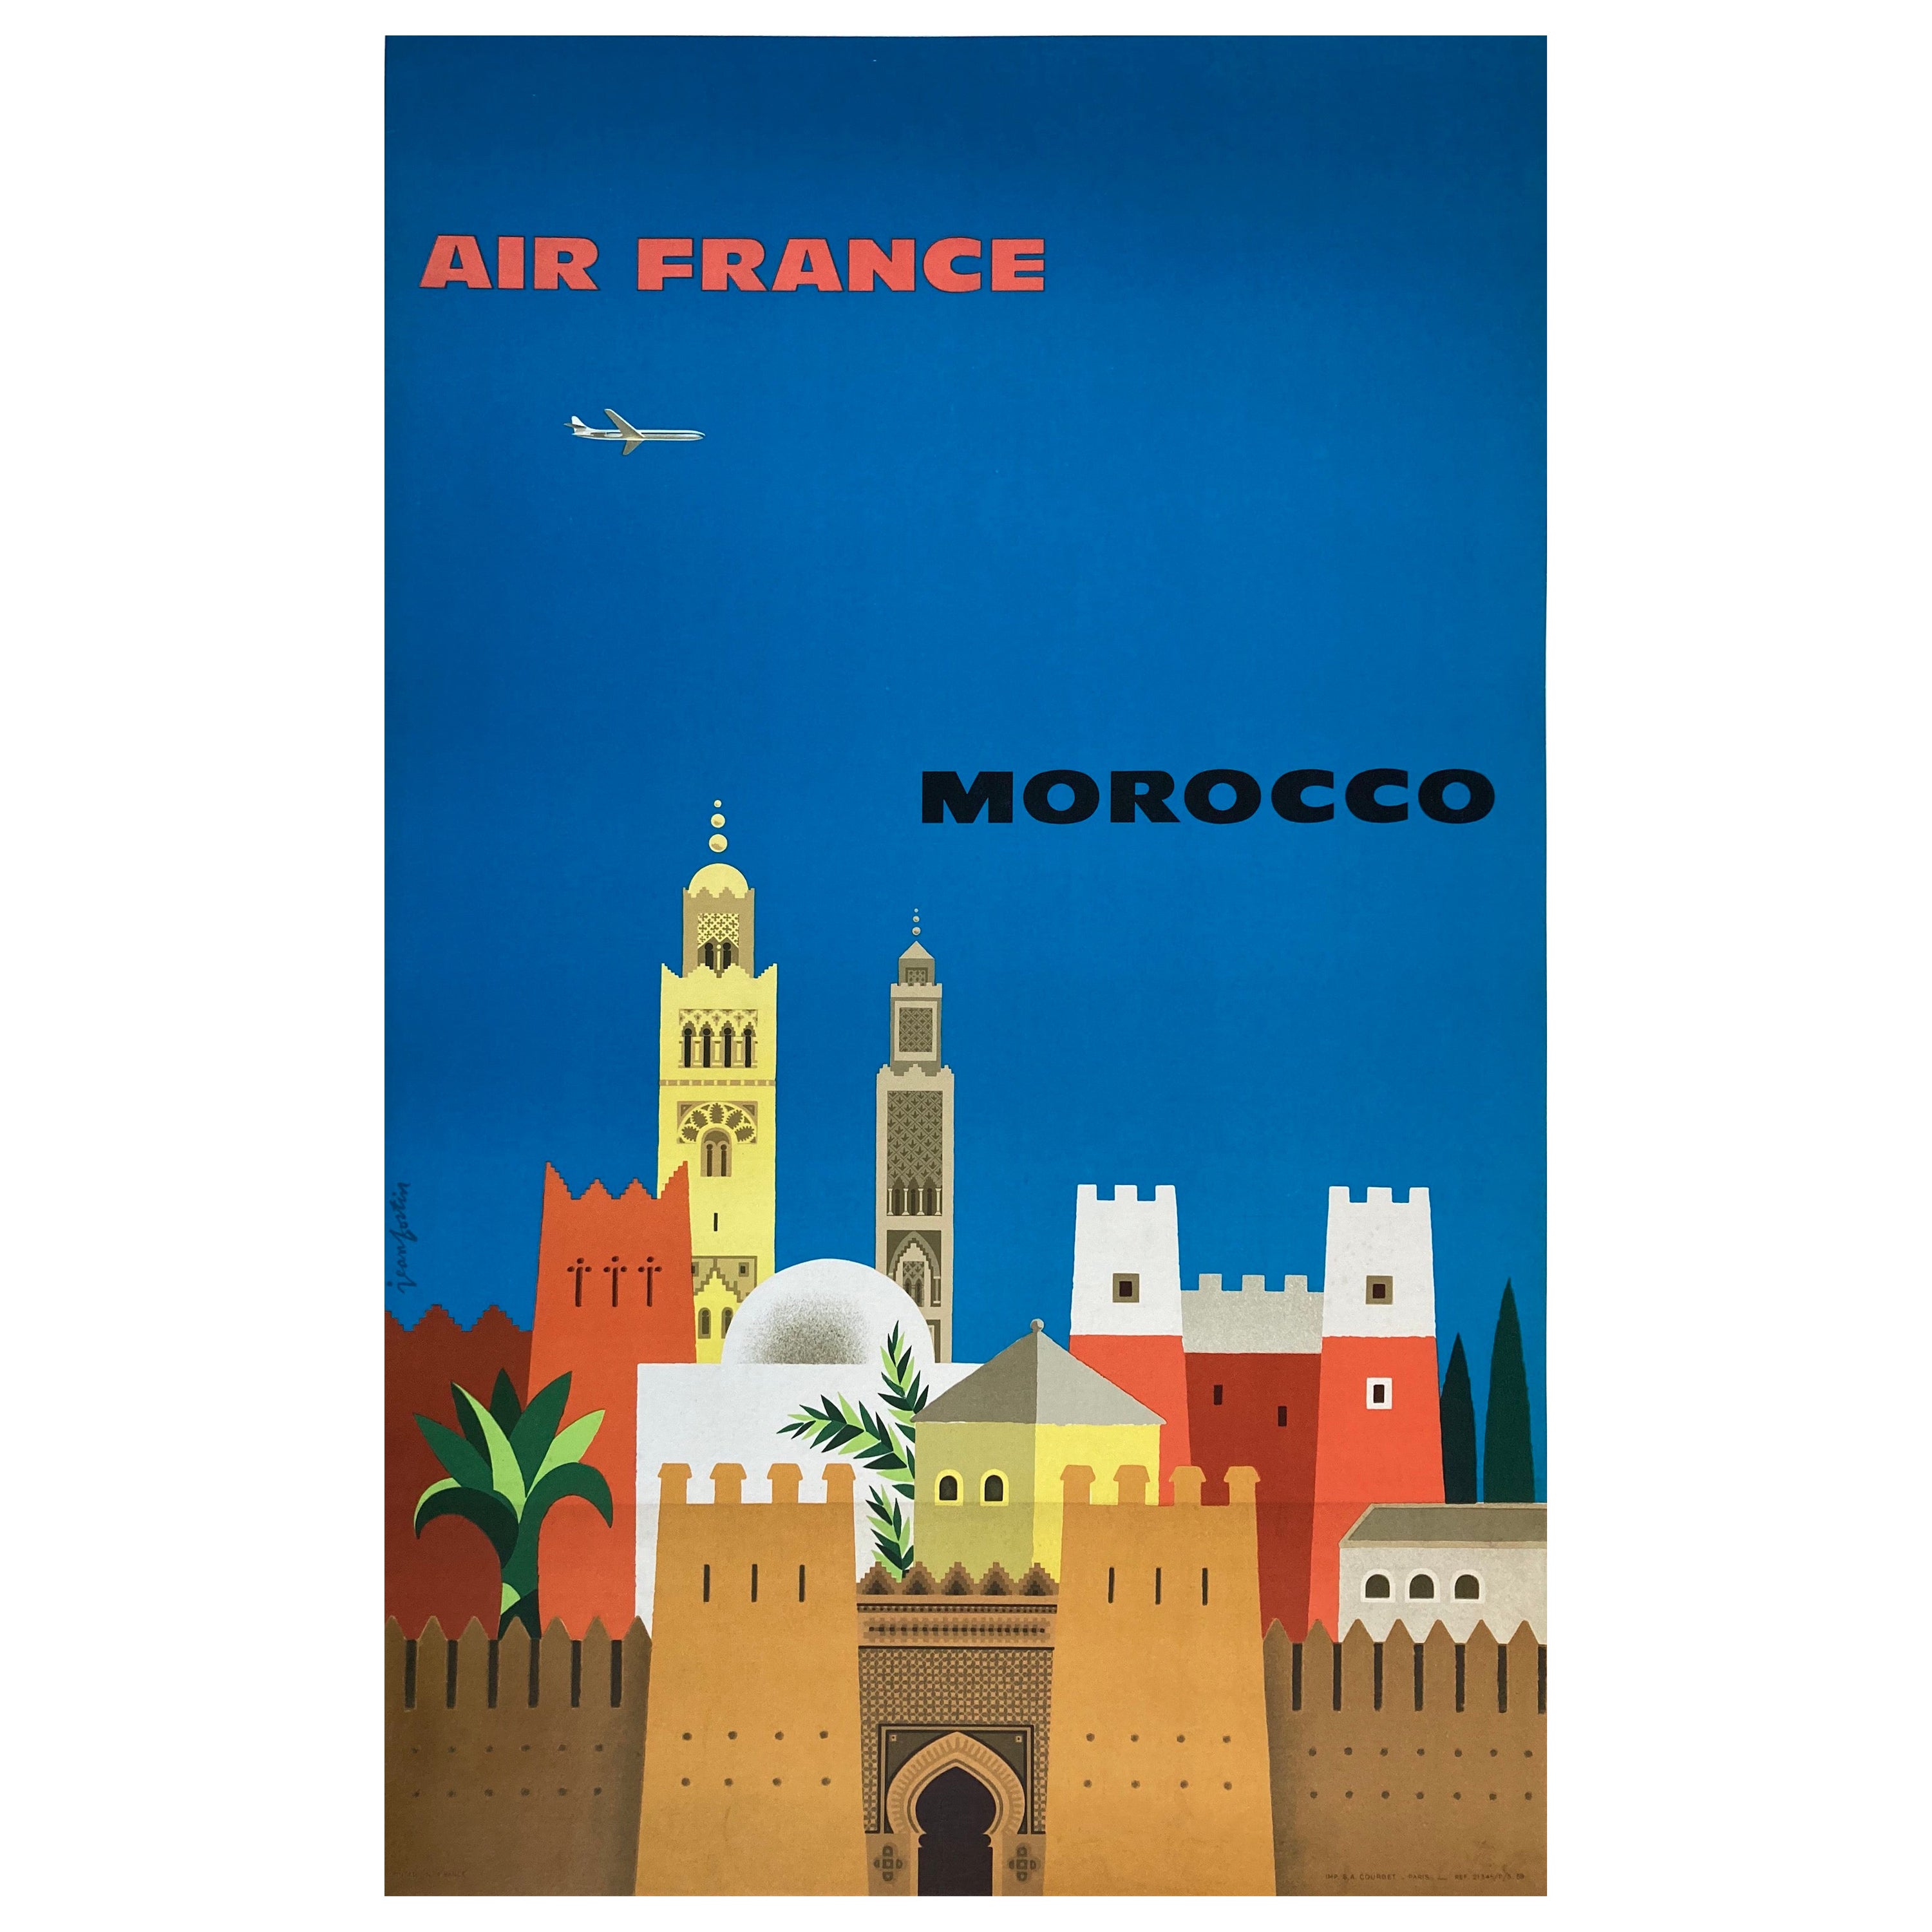 Original 1959 Air France Morocco Travel Poster, Jean Fortin